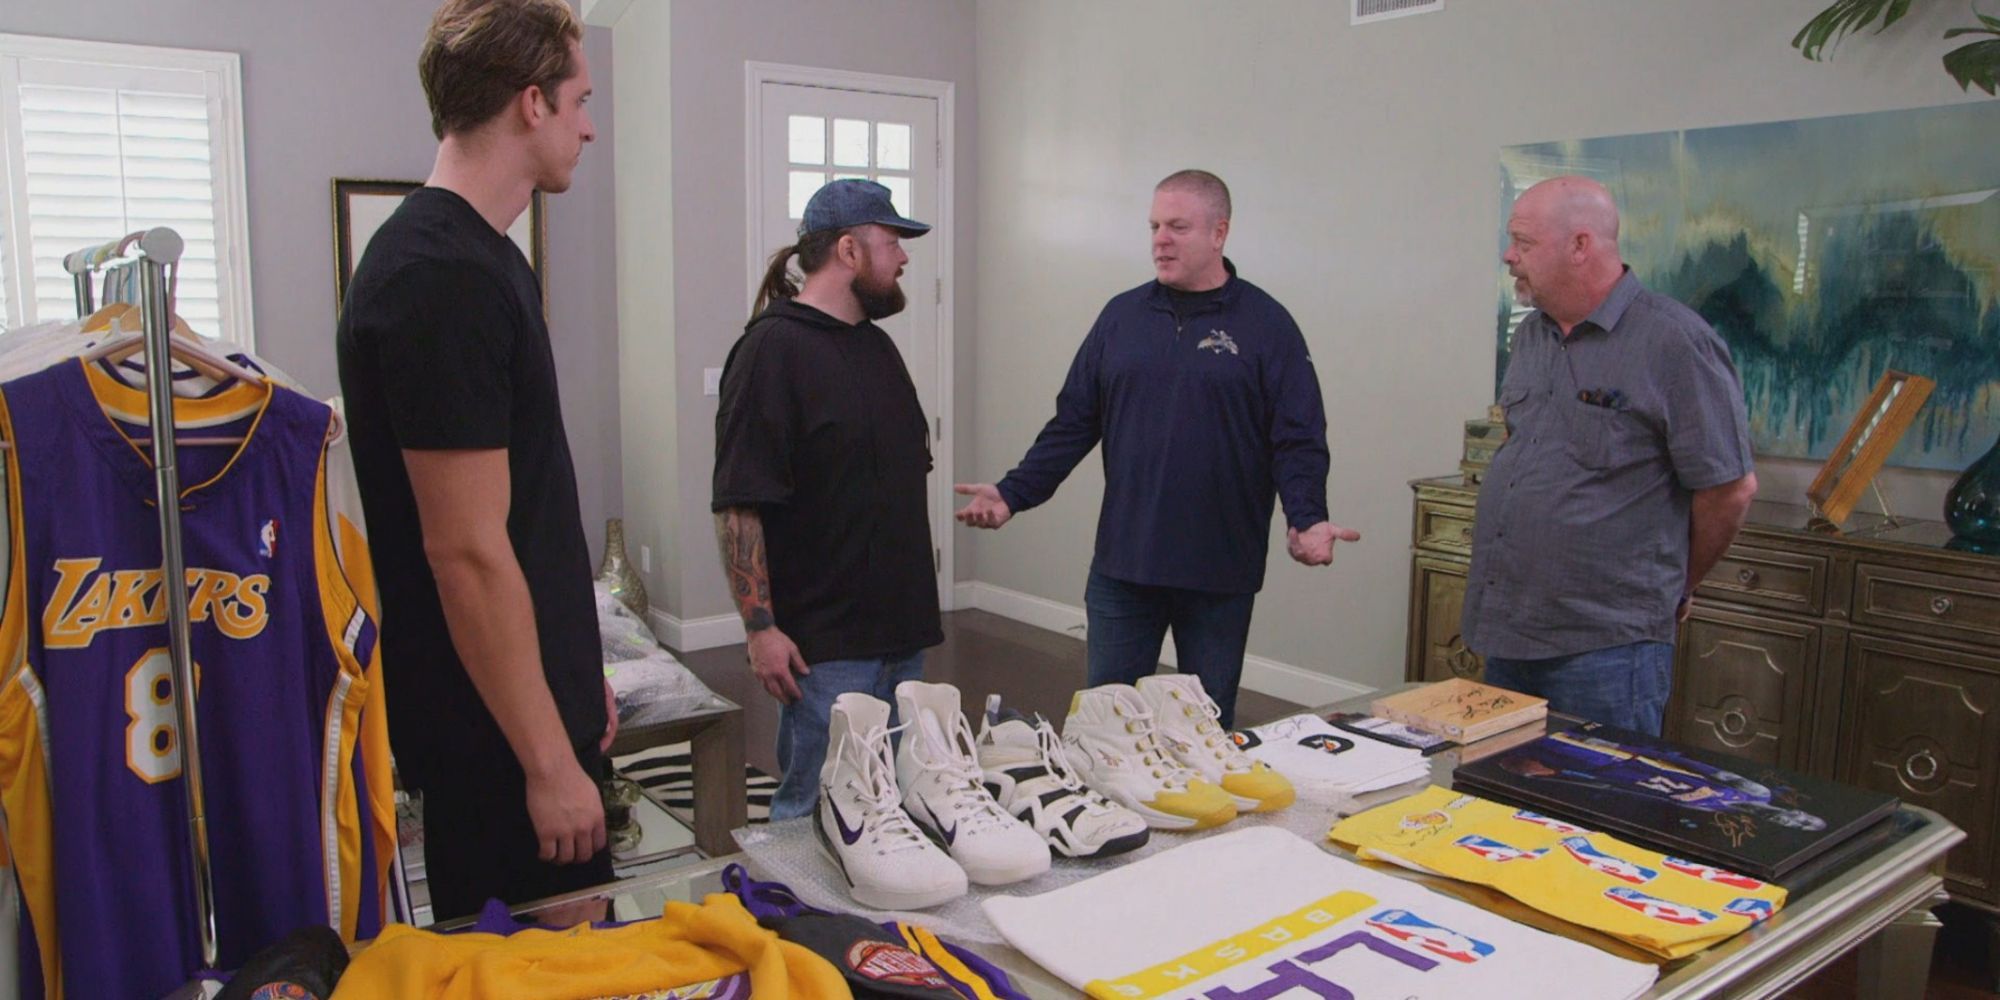 Pawn stars cast looking at items